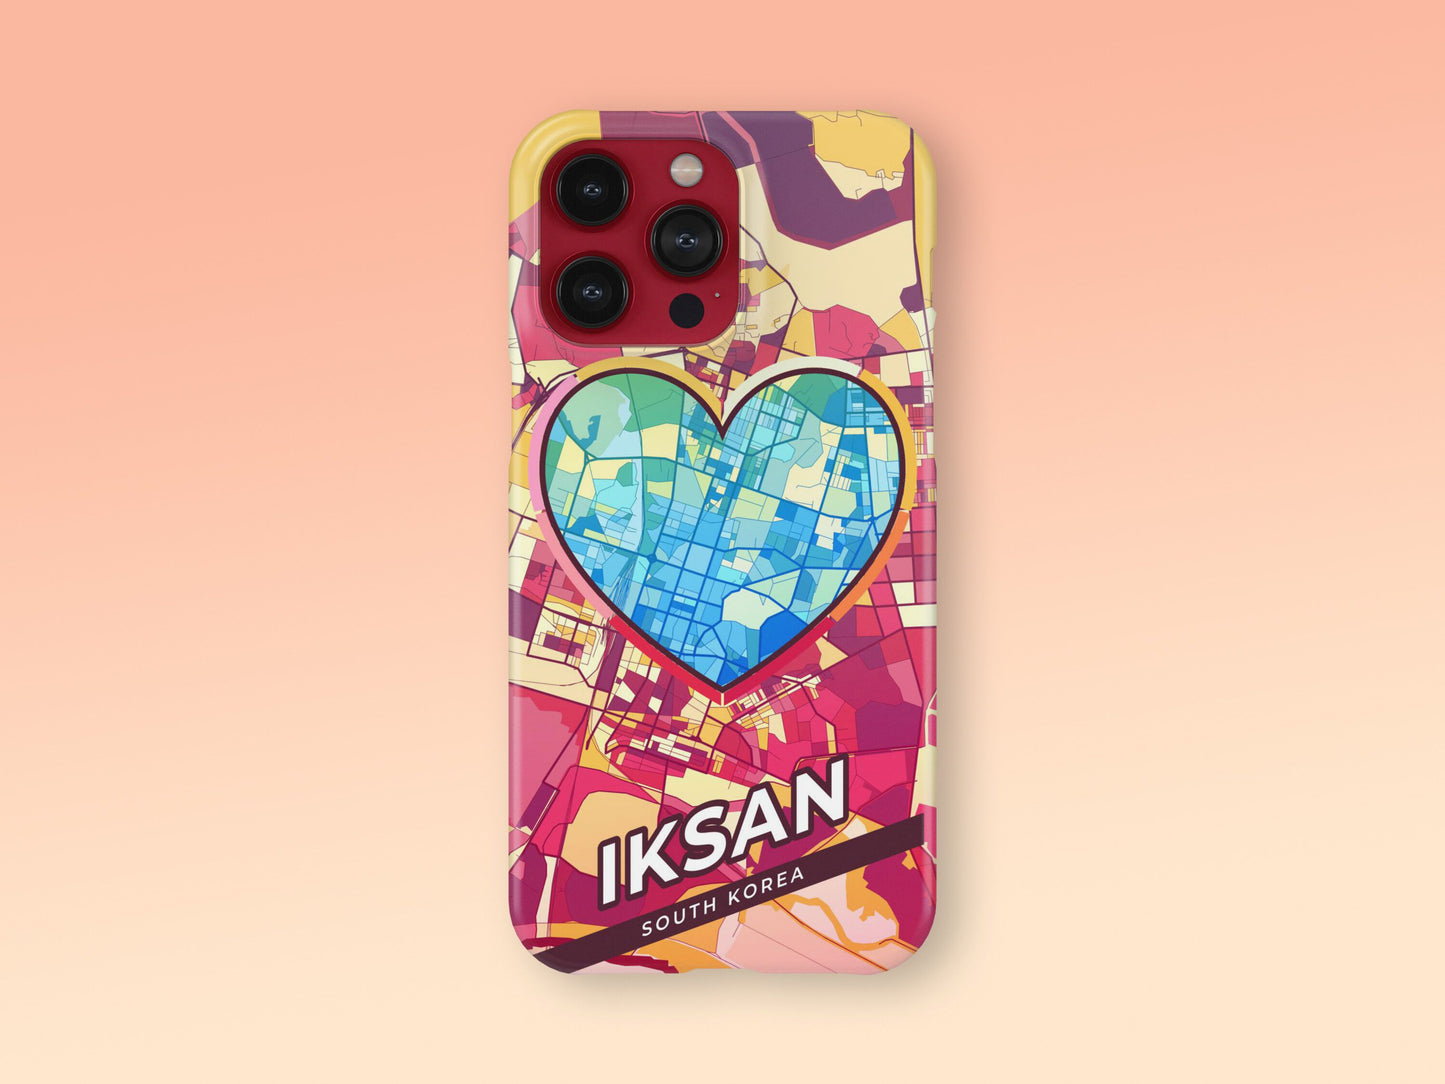 Iksan South Korea slim phone case with colorful icon. Birthday, wedding or housewarming gift. Couple match cases. 2